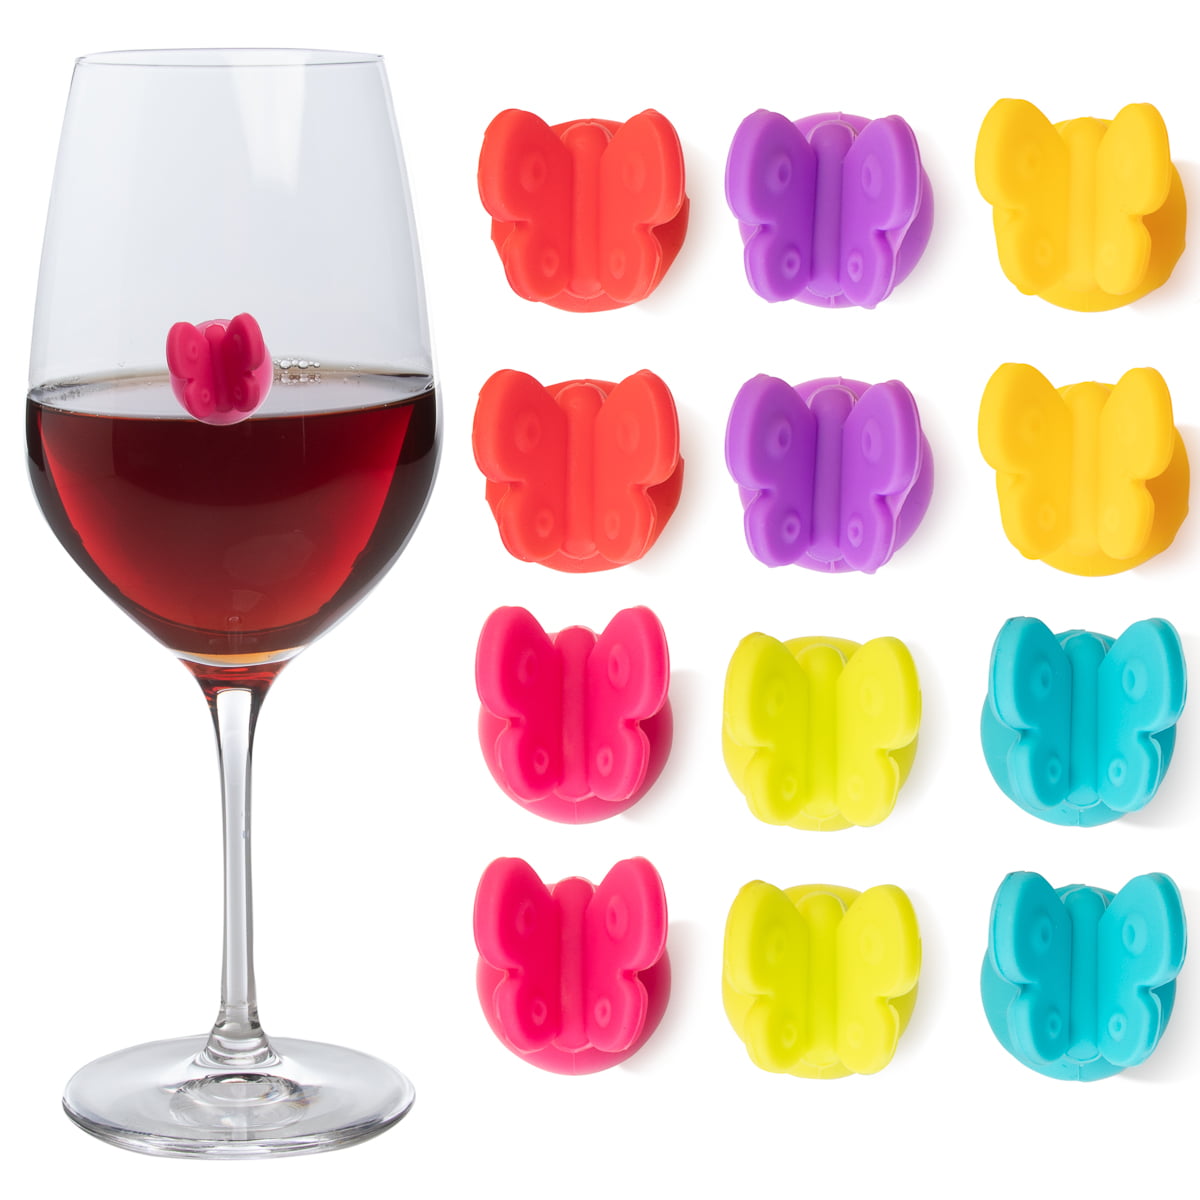 Bird Silicone Wine Glass Markers - Colorful, Decorative, Parties Set of 6 -  NEW